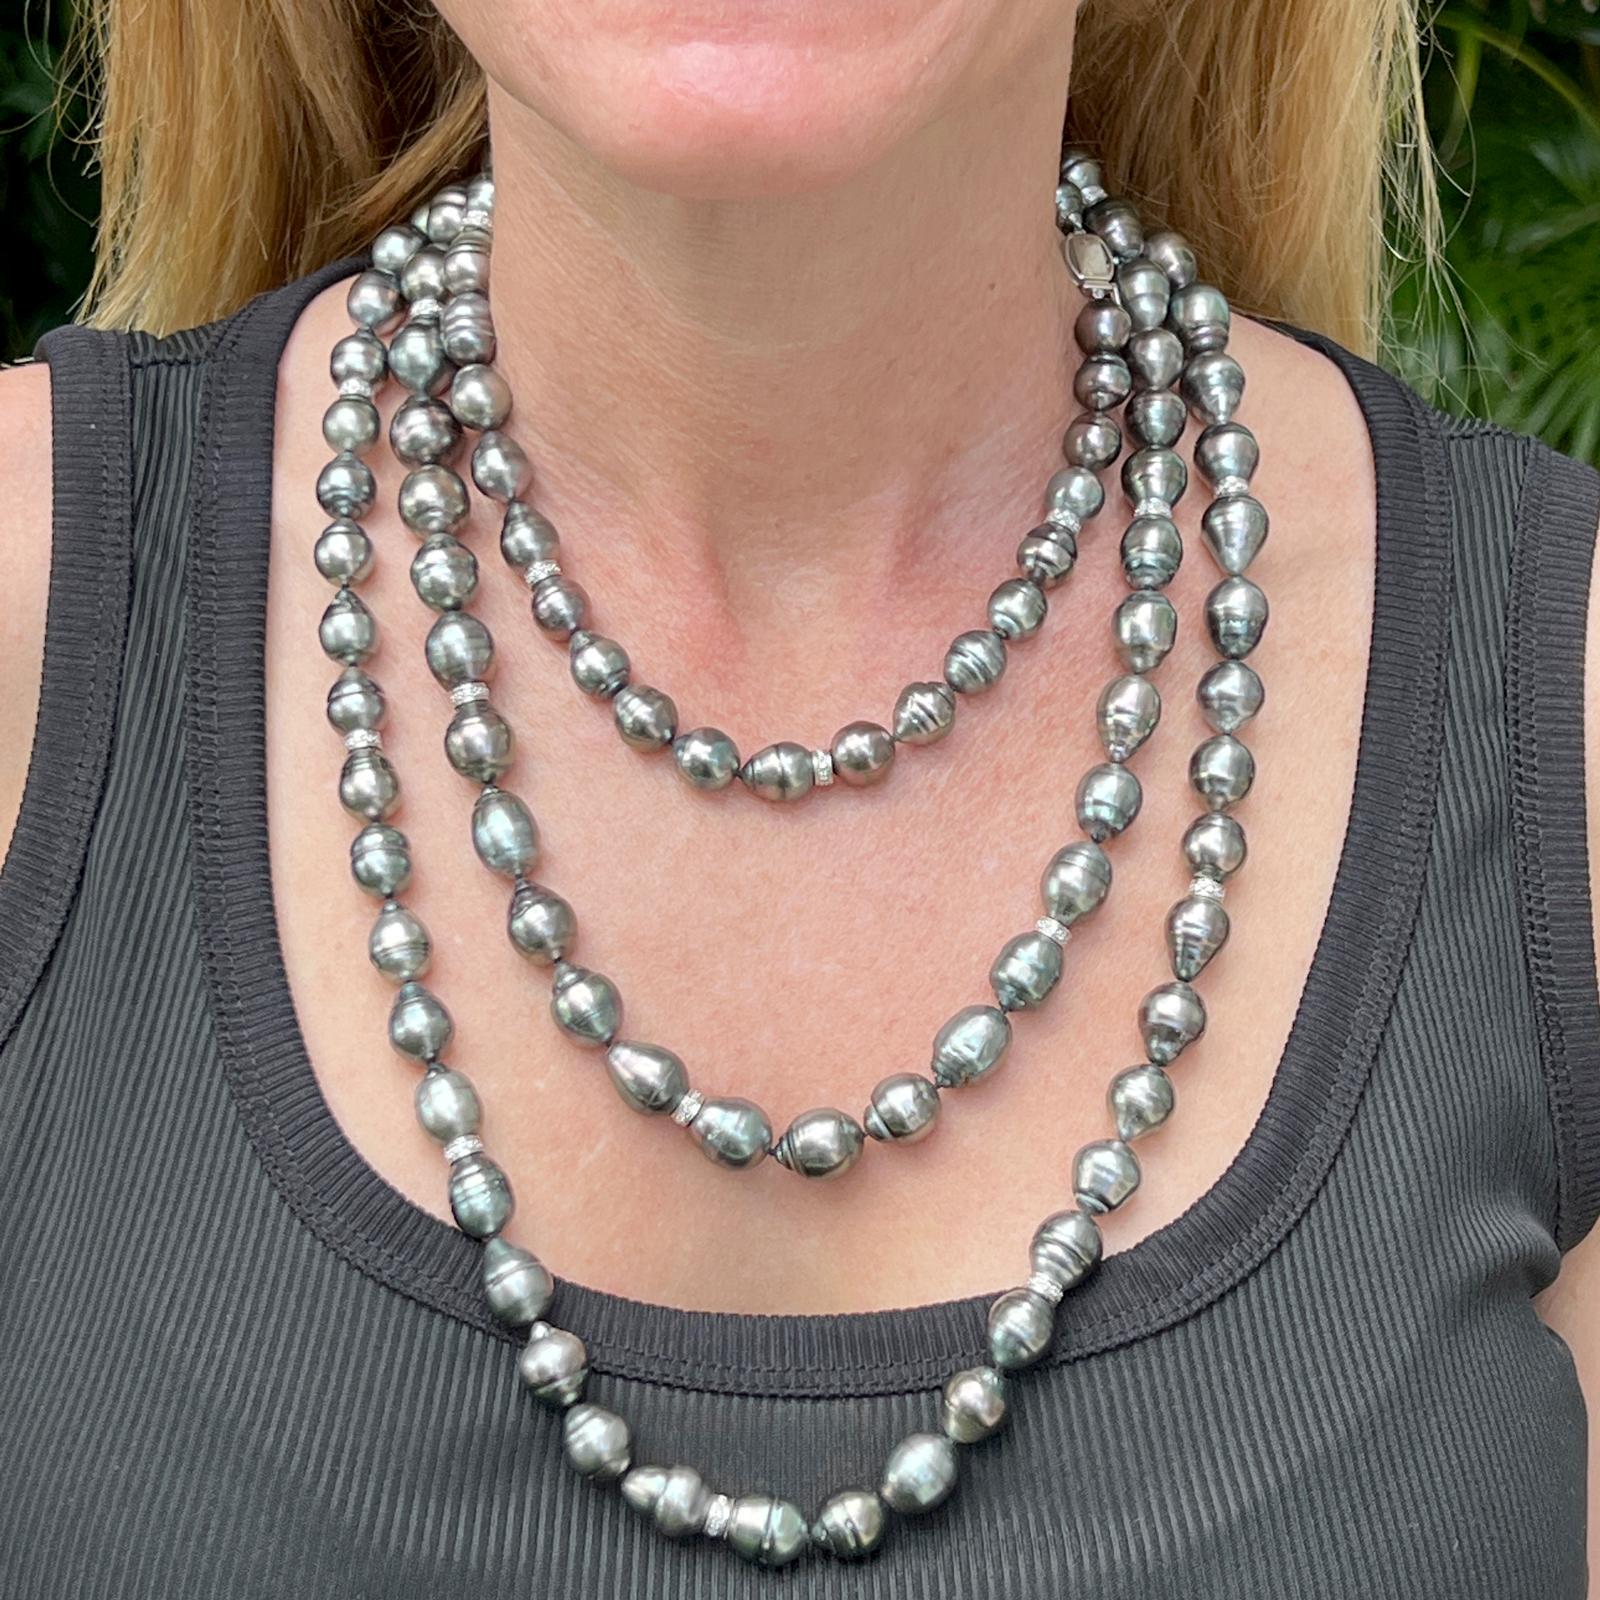 Beautiful long strand of black baroque pearls with diamond rondells. The 64 inch necklace features black baroque pearls intersperced with diamond rondells weighing approximately 1.00 carat total weight. The necklace can be worn multiple ways and has